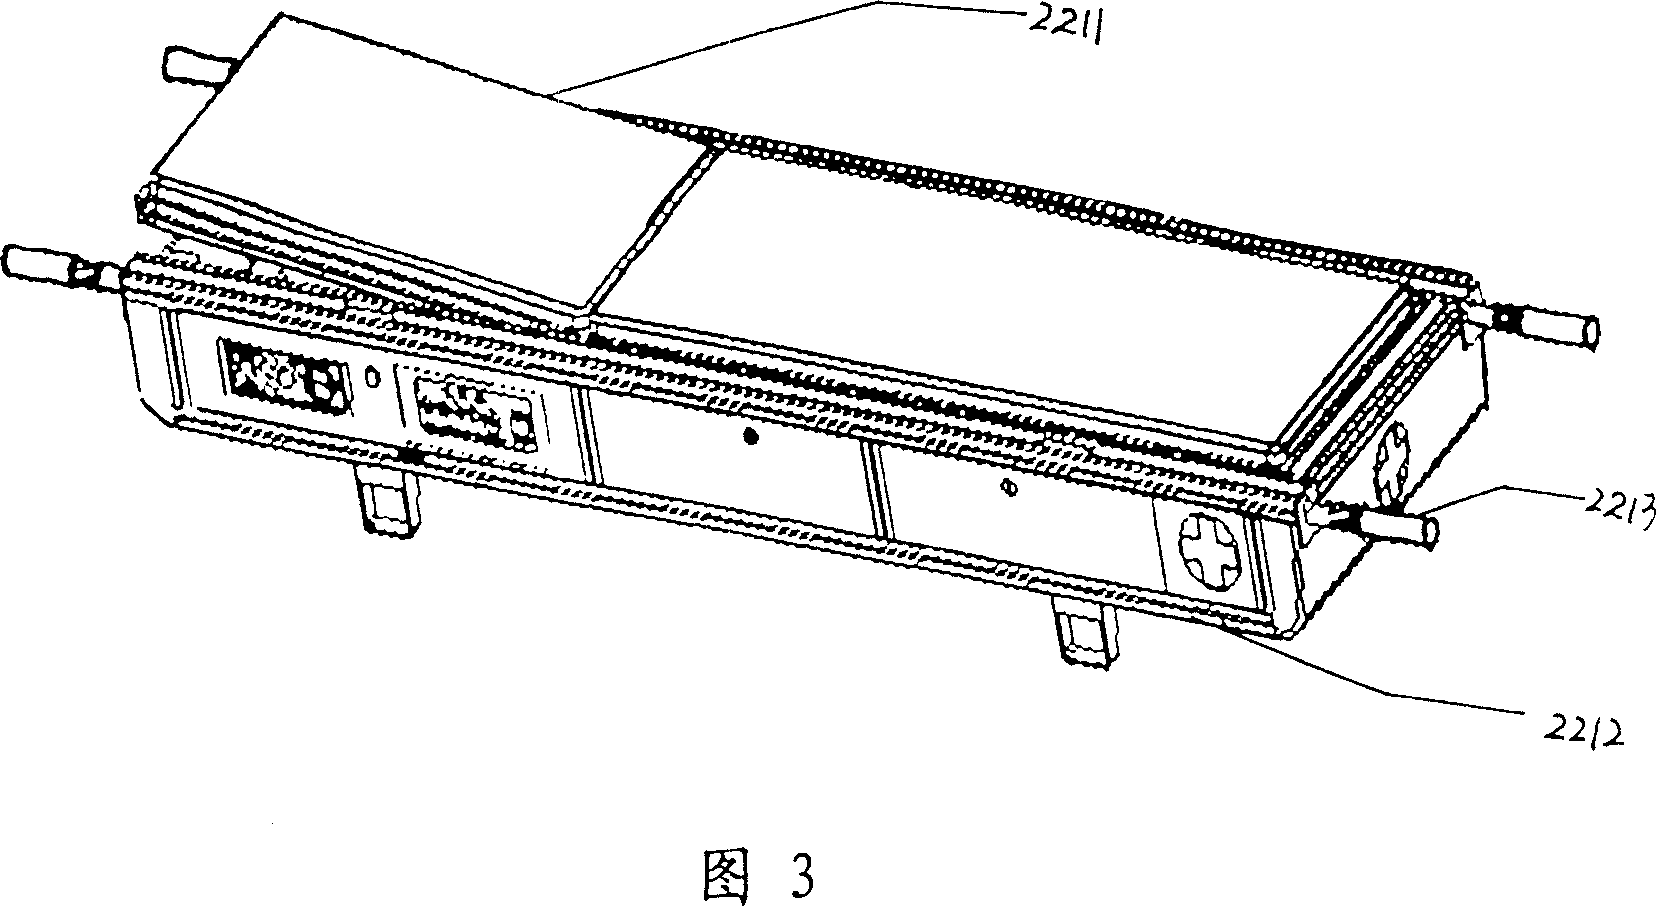 Stretcher assembly type complex emergency treatment system